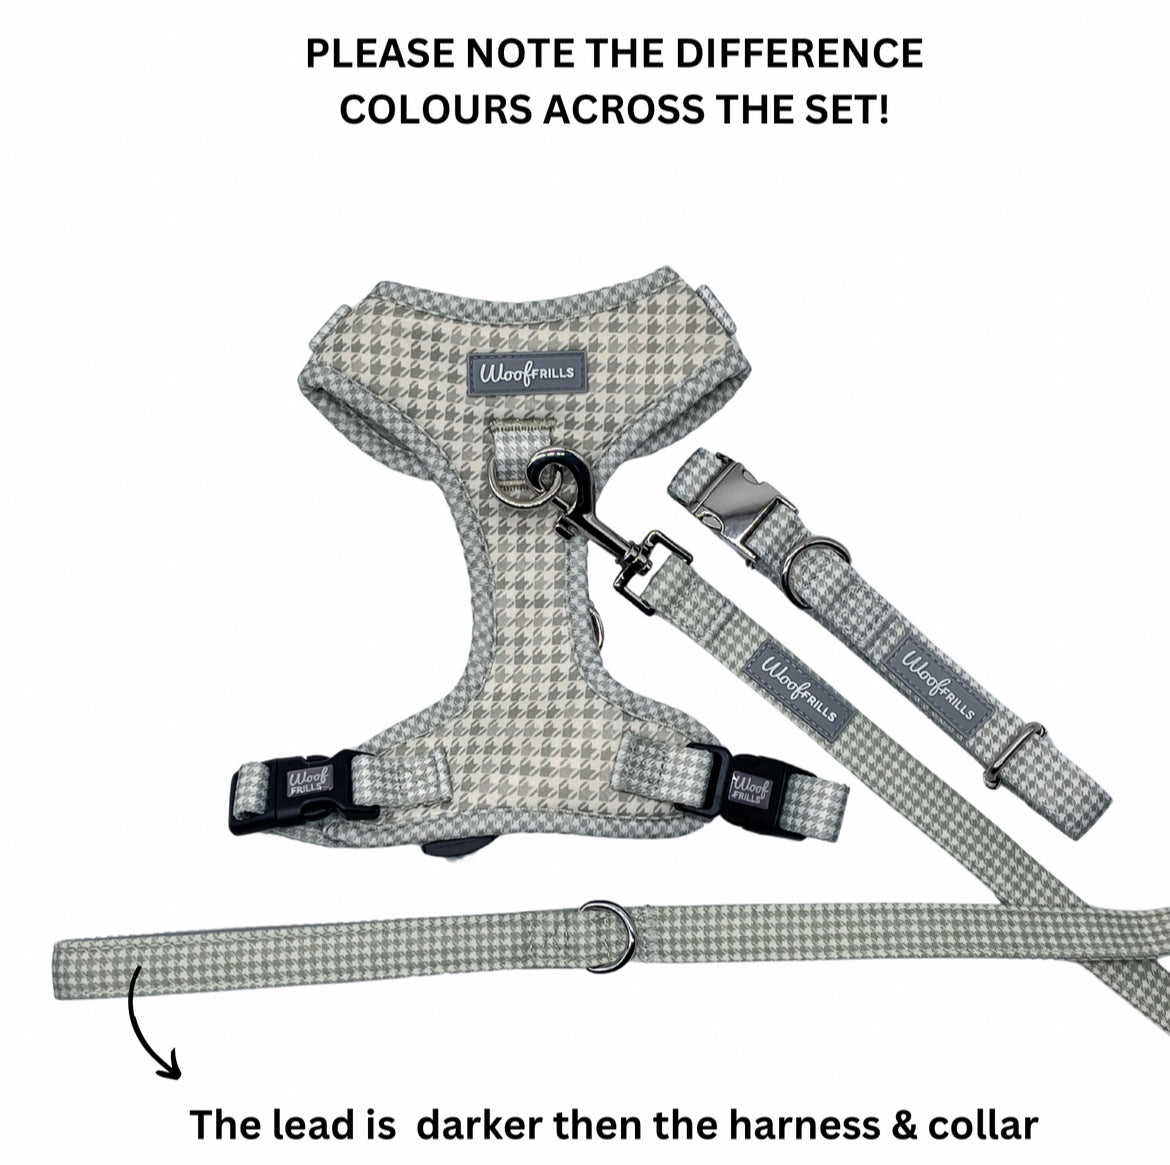 Dog lead and harness
